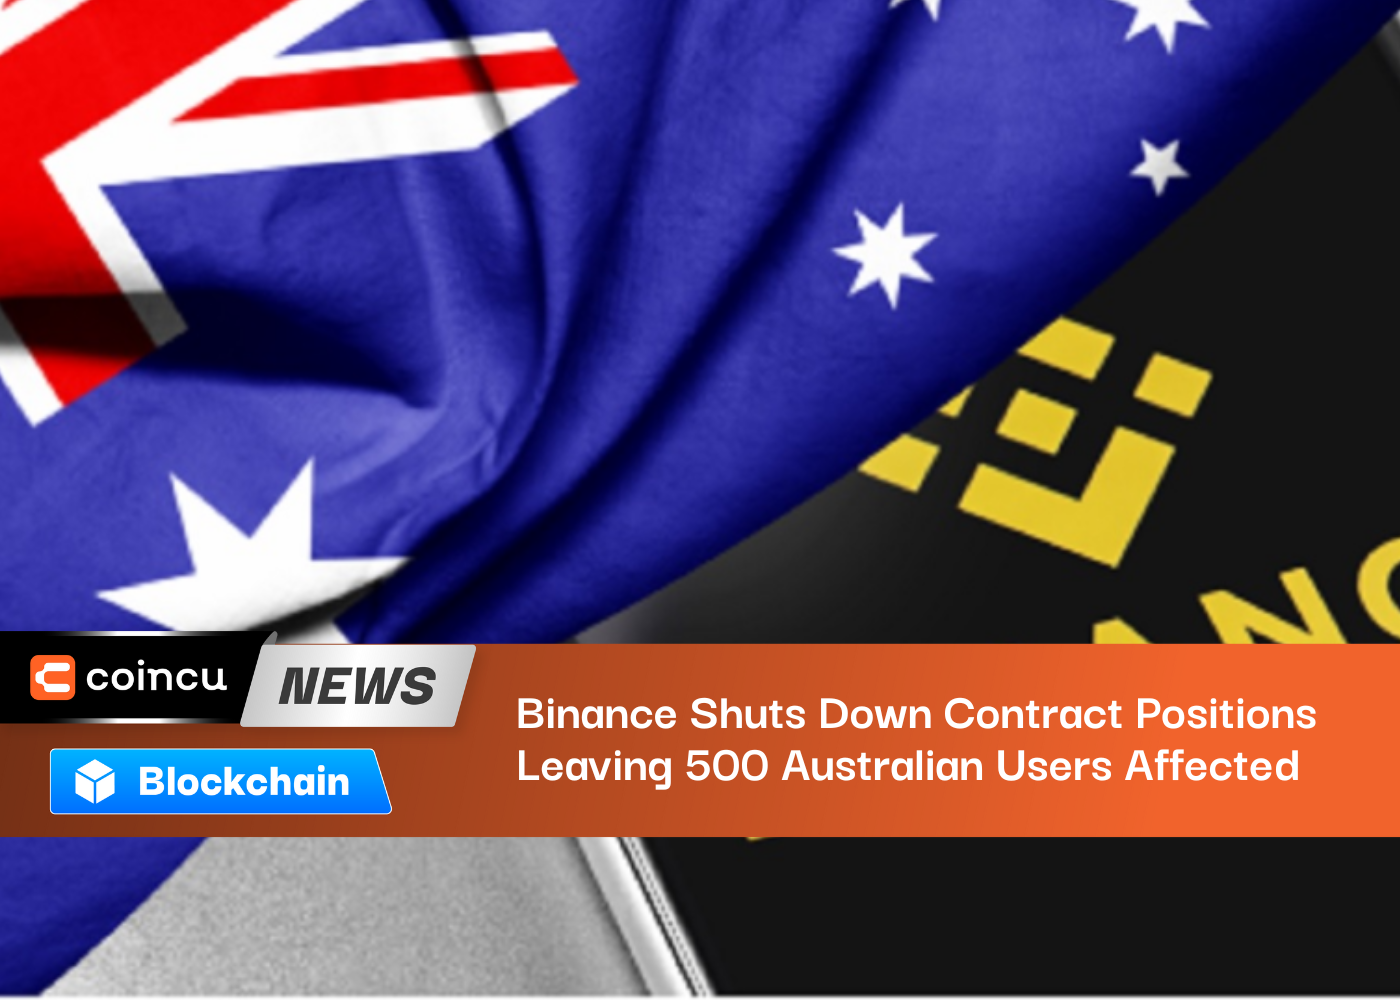 Shocking! Binance Shuts Down Contract Positions, Leaving 500 Australian Users Affected